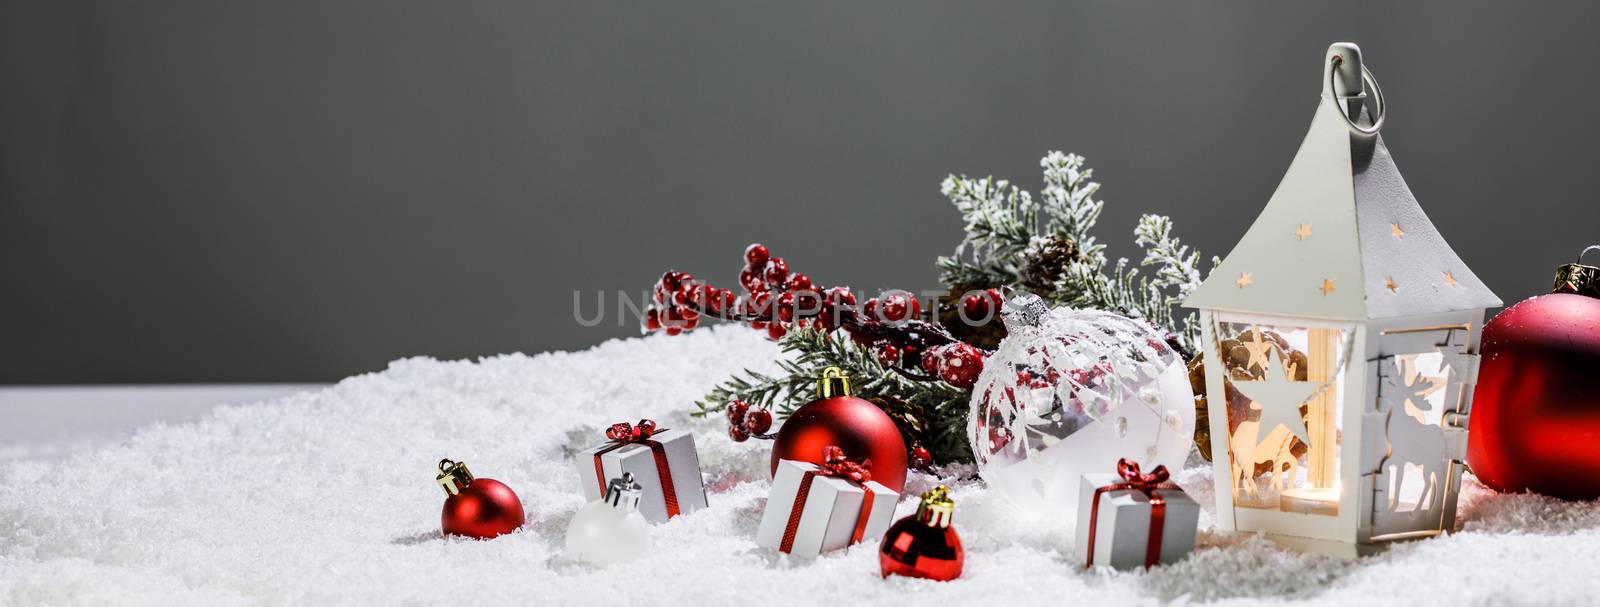 Christmas composition of lantern colorful ornaments balls stars candles and fir tree branches on snow